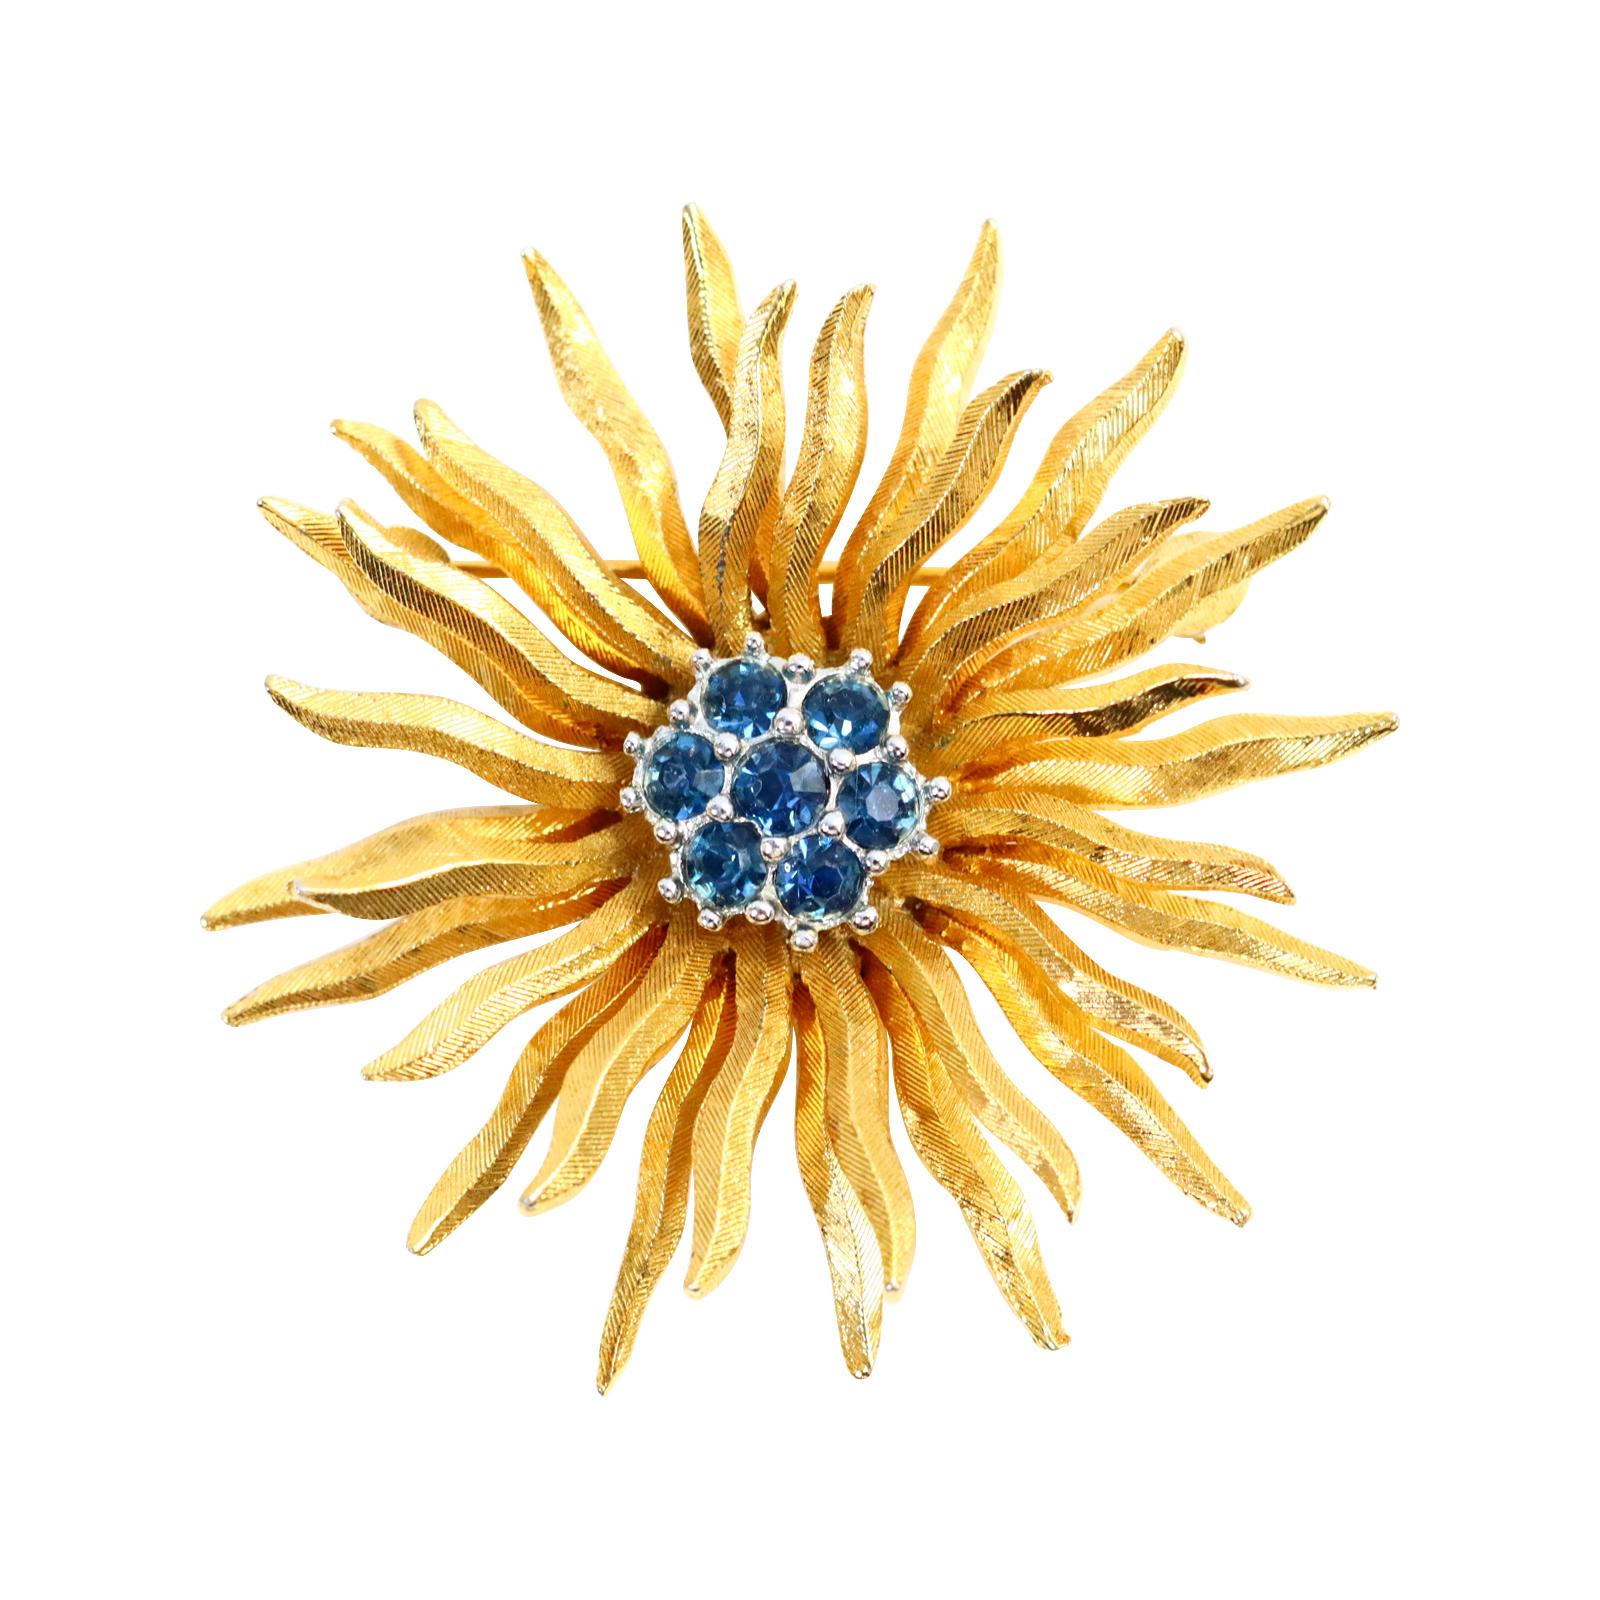 Vintage D'orlan Gold Starburst with Blue diamante set in Silver Circa 1980s. This brooch looks so chic due to its juxtaposition with the gold and then the blue set in silver tone metal in the middle. It is heavy and substantial and gives the air of